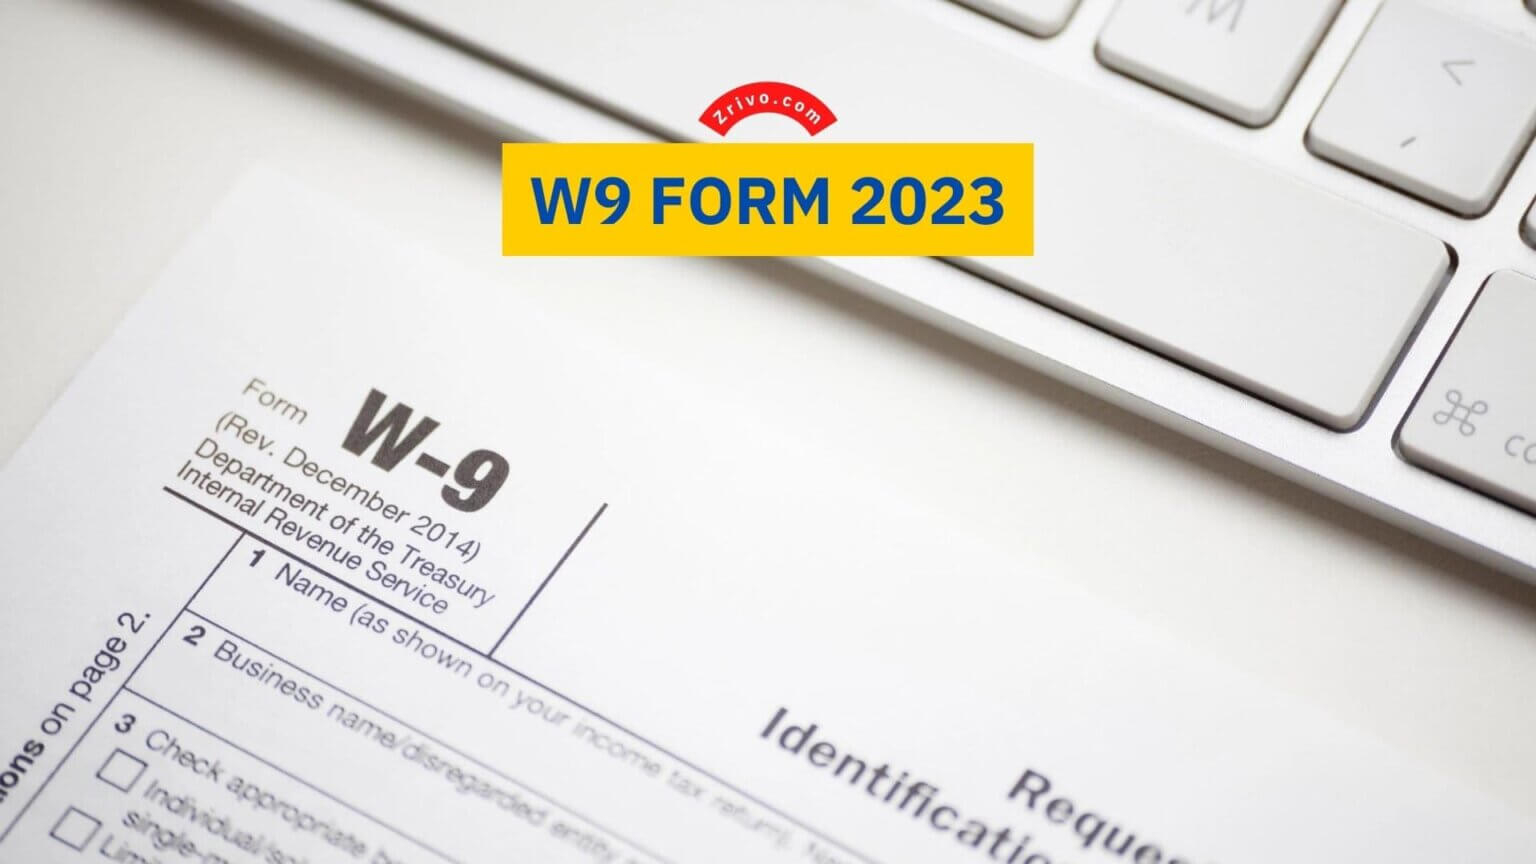 Will There Be Further Changes In 2023 Tax Forms